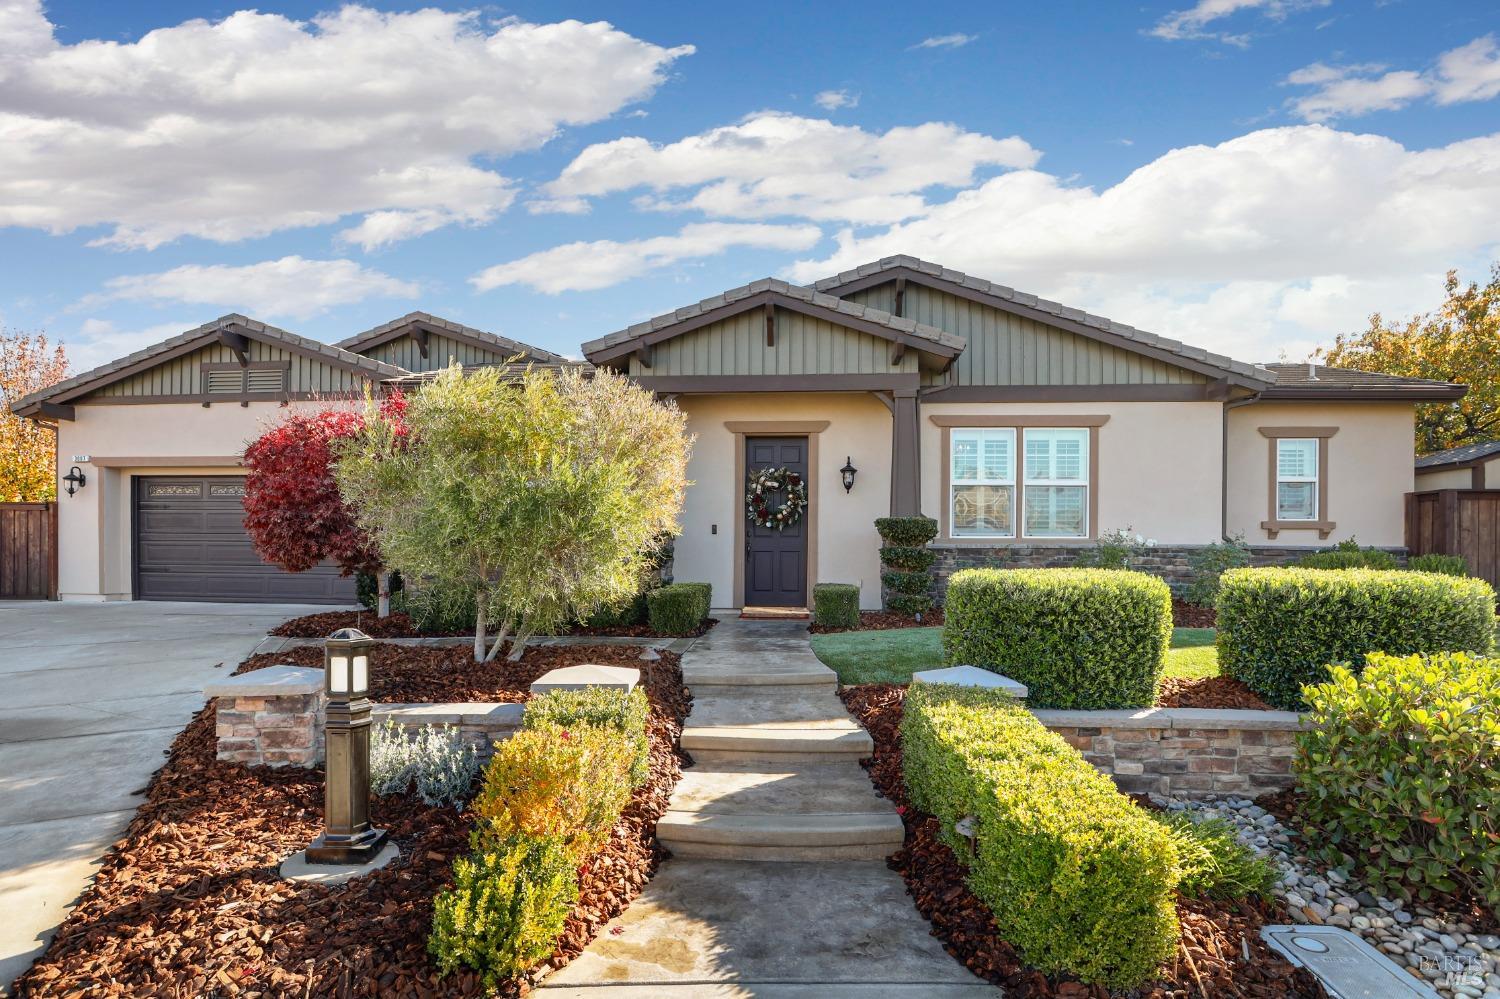 3007 Eagles Nest Ct, Vacaville, CA, 95688